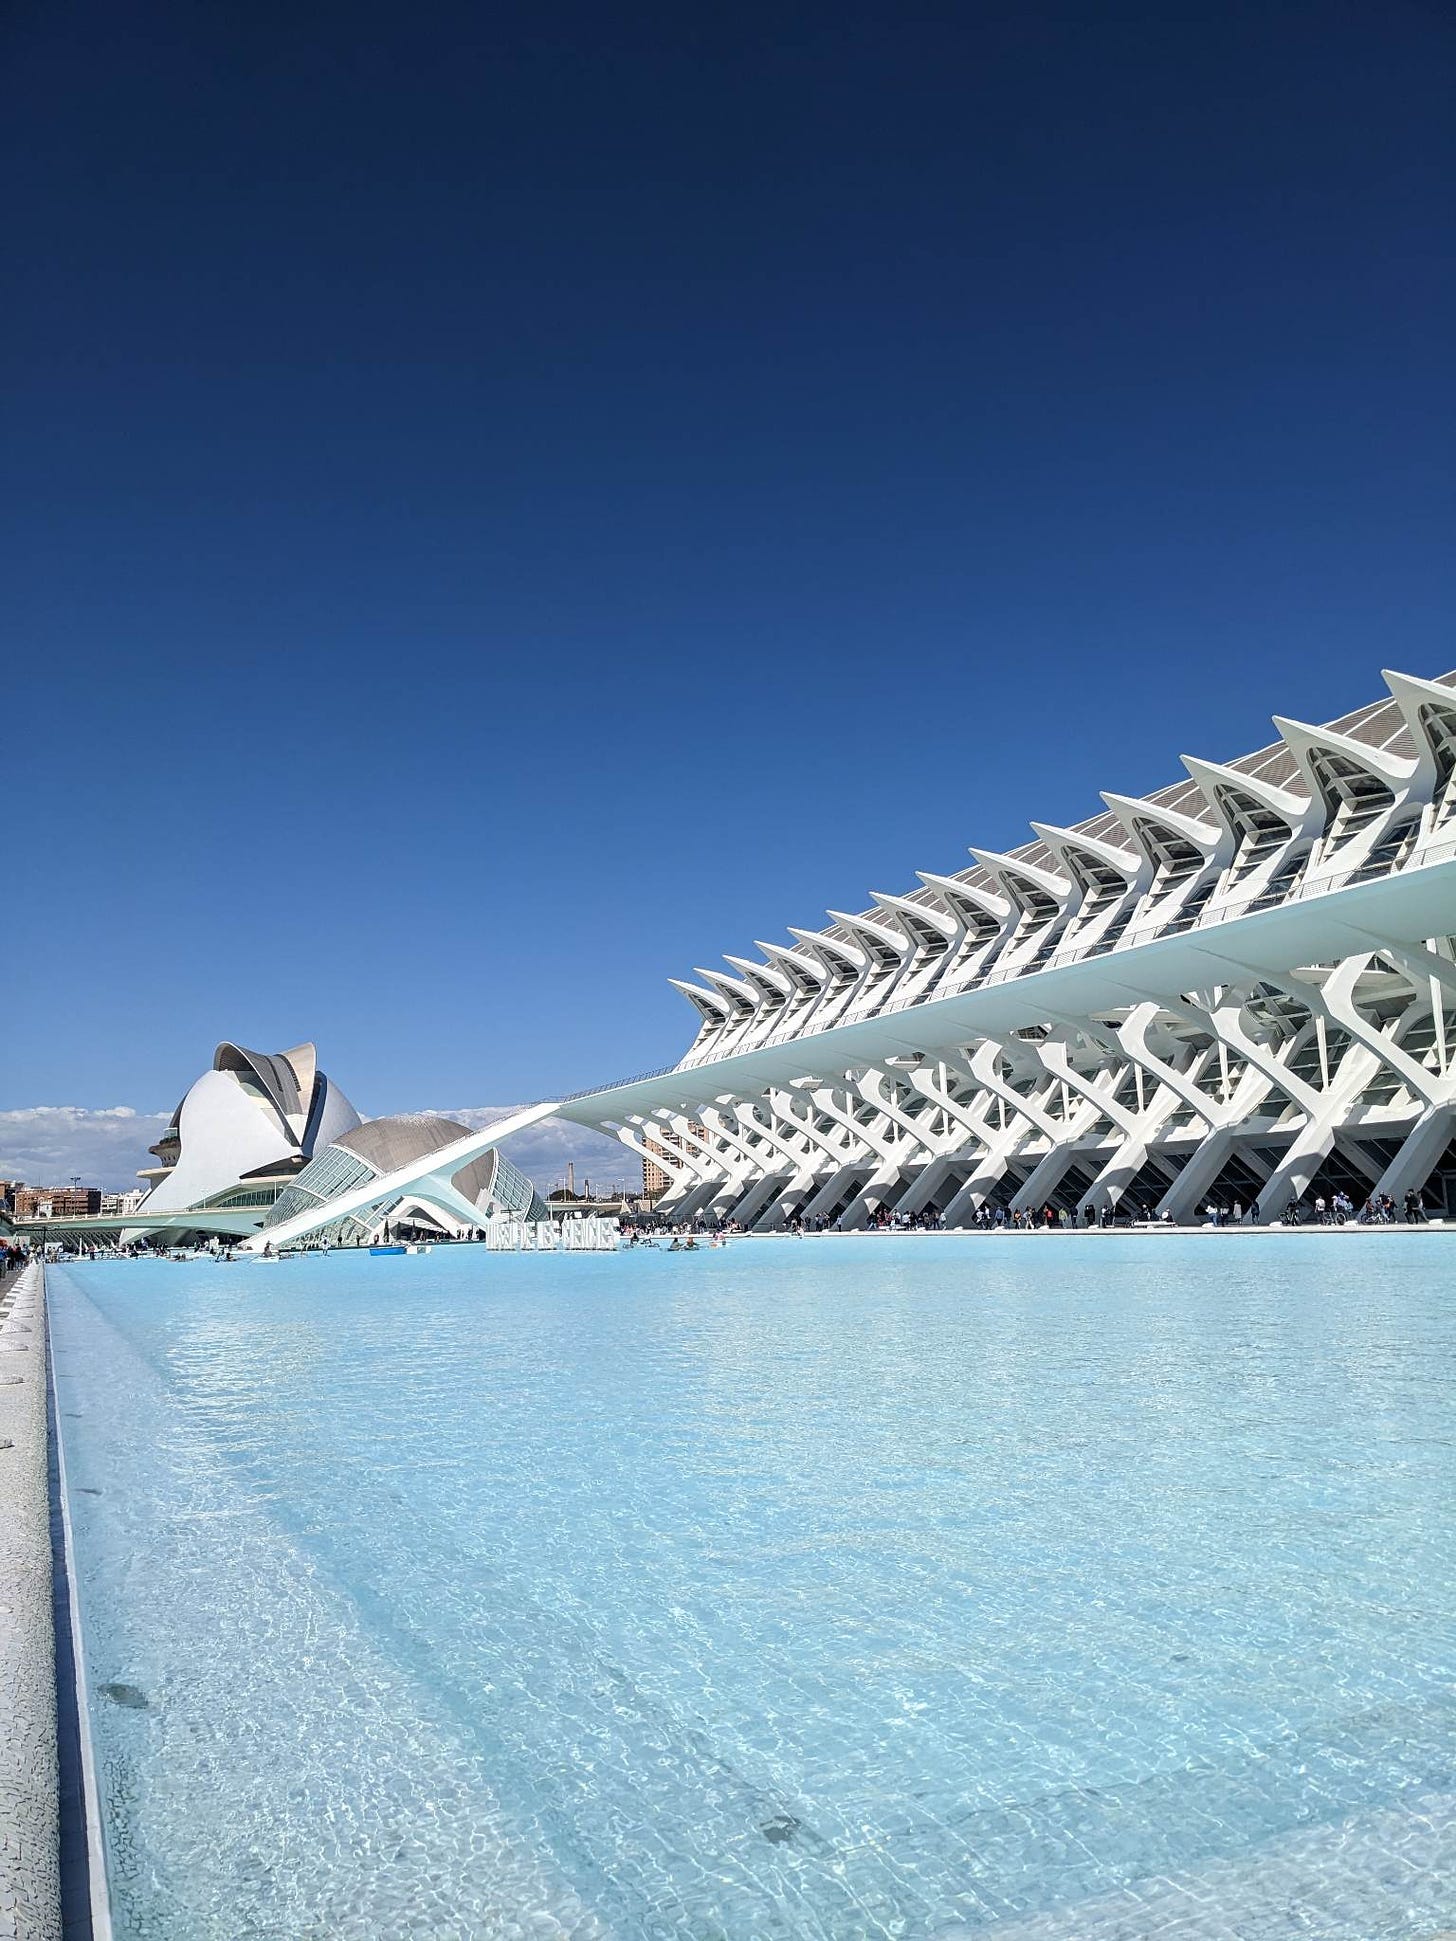 clear blue water, a blue sky and modern white architecture